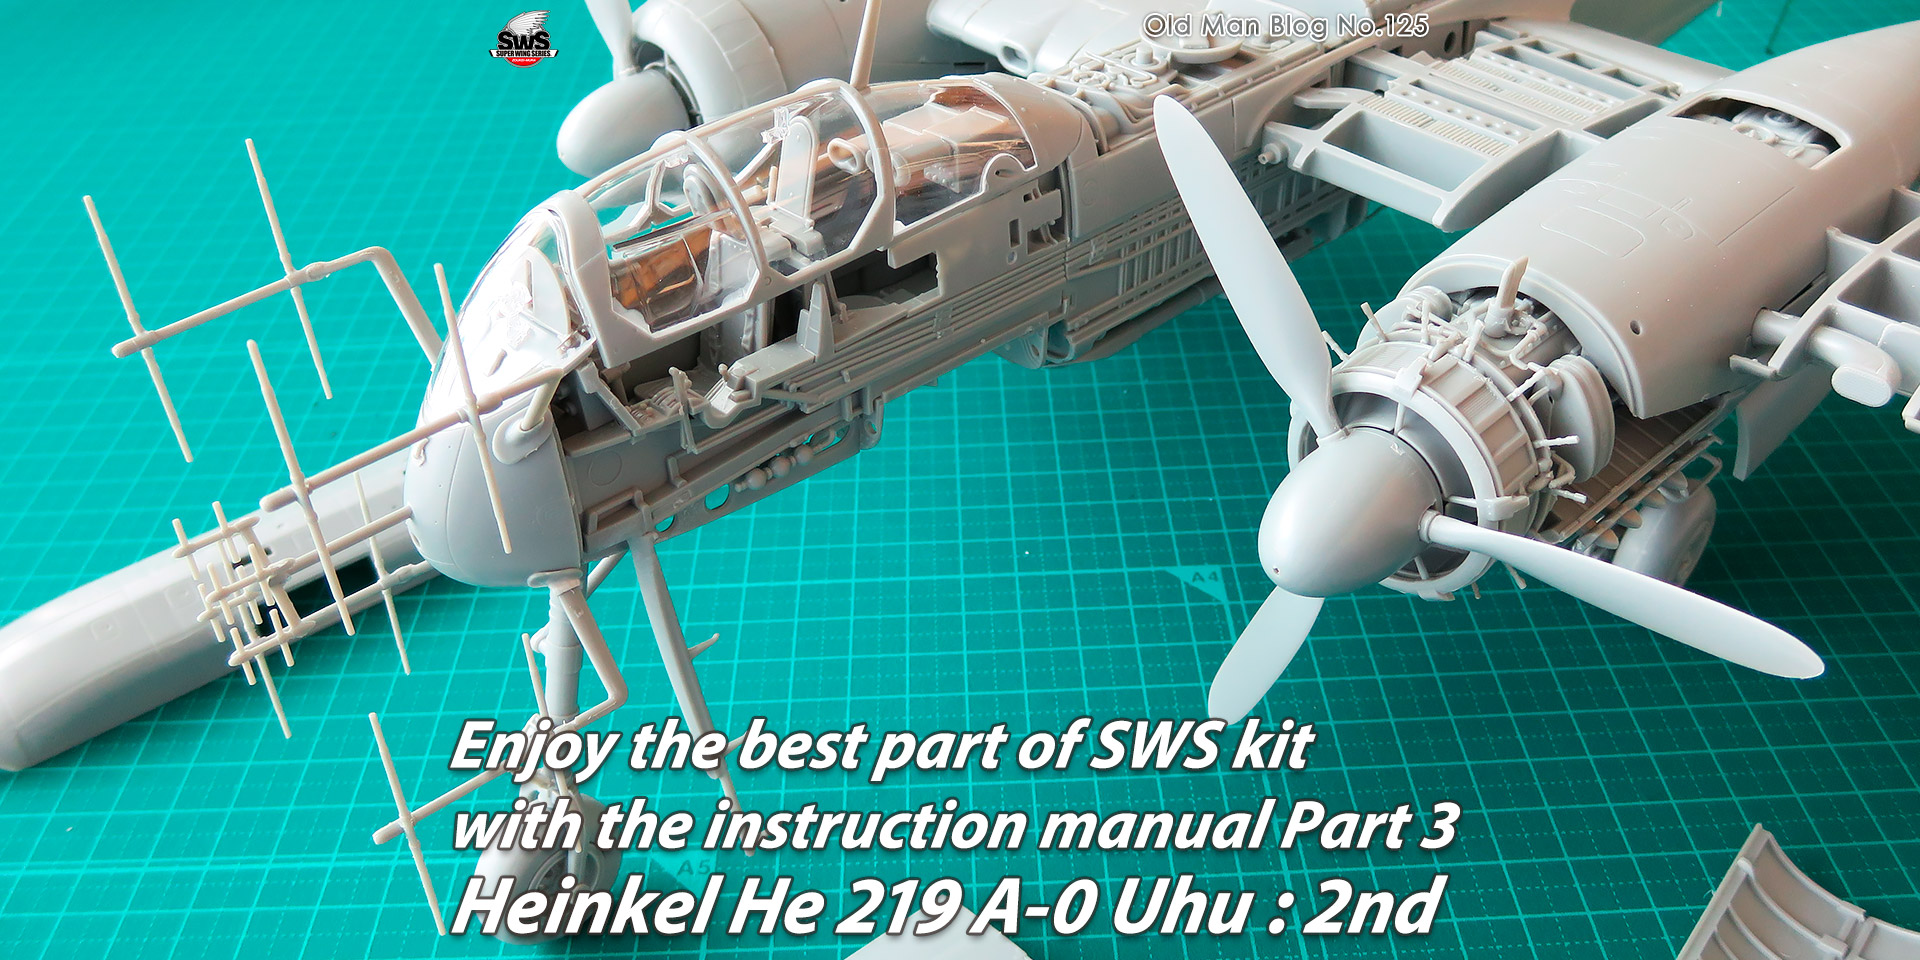 Enjoy the best part of SWS kit with the instruction manual Part 3: Heinkel He 219 A-0 Uhu :2nd